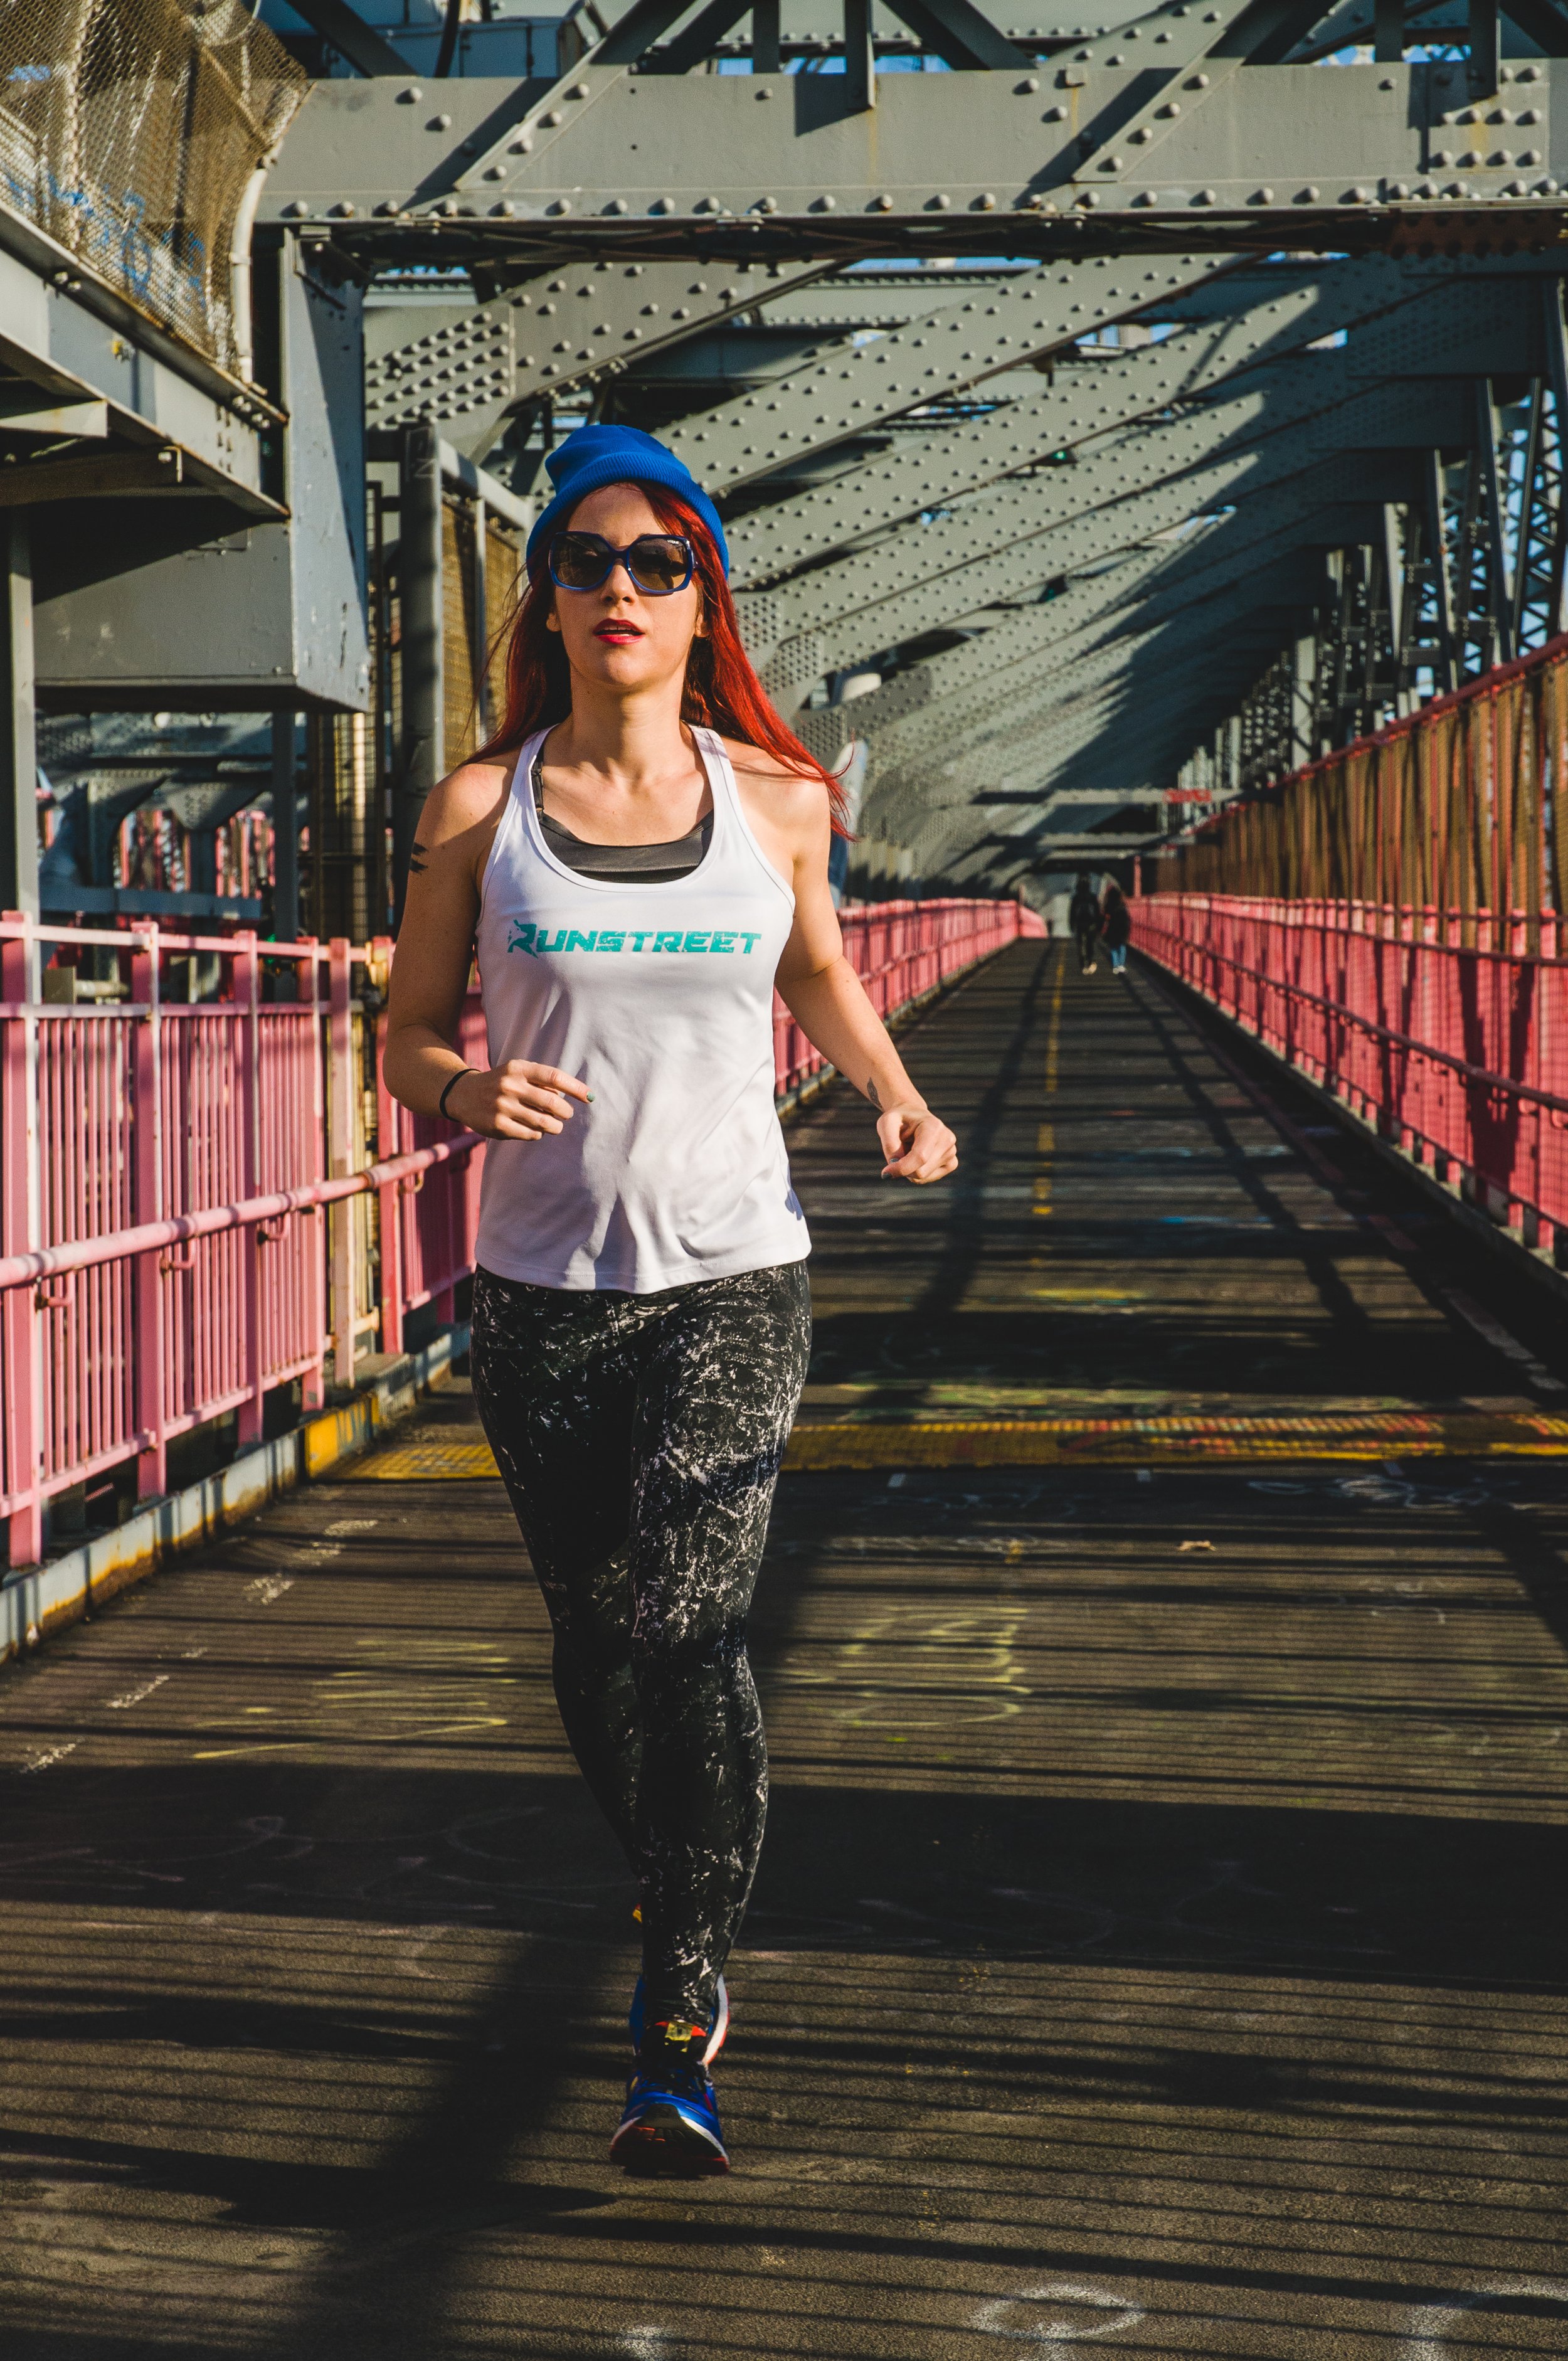 30-Minute Run Workouts to Bust Boredom and Burn Calories - Run For